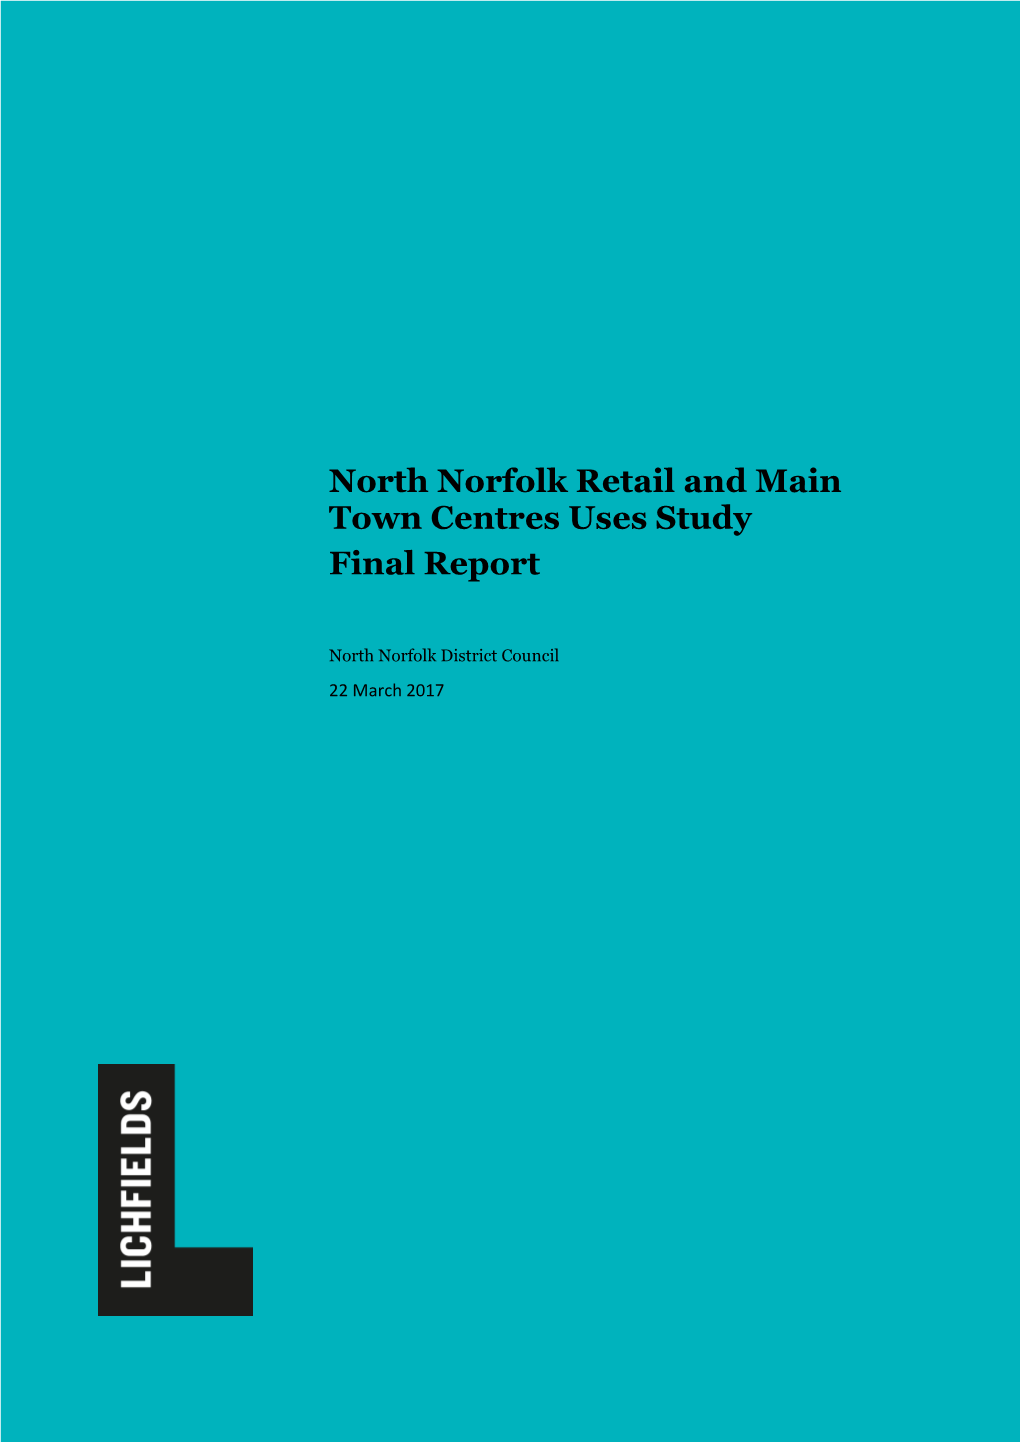 North Norfolk Retail and Main Town Centres Uses Study Final Report